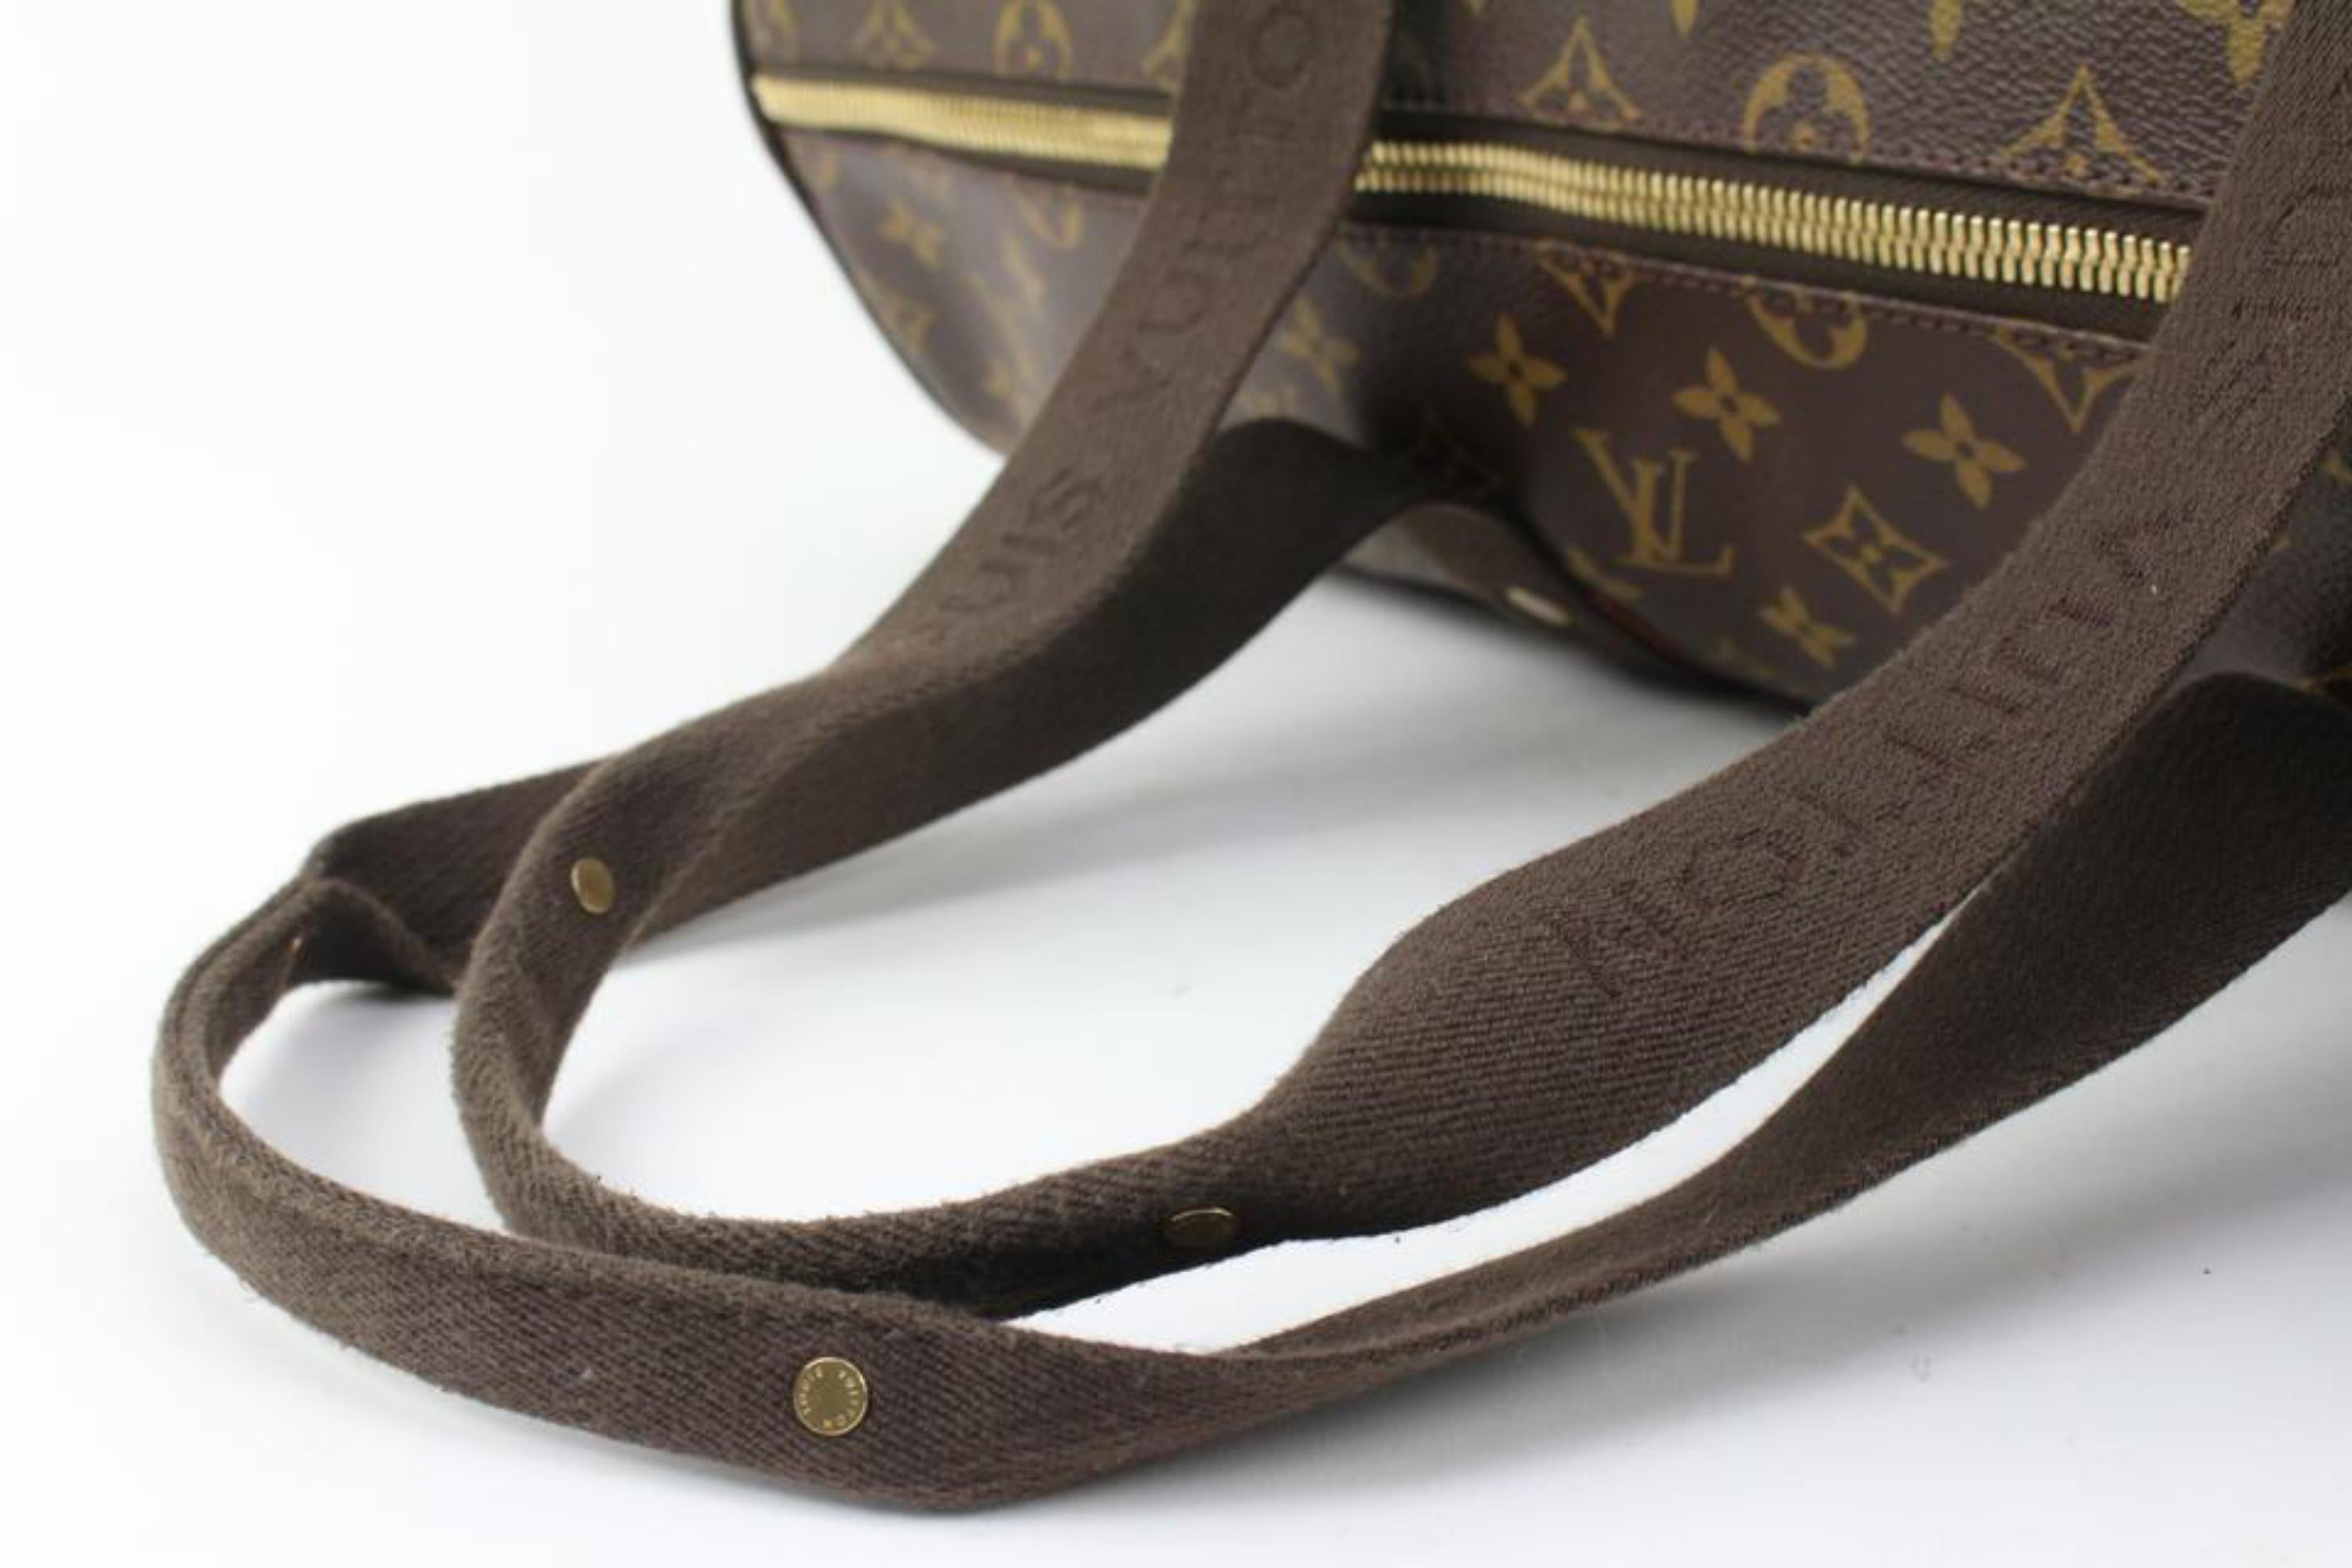 Louis Vuitton Monogram Sporty Beaubourg Duffle Boston Duffle s29lv40 In Good Condition For Sale In Dix hills, NY